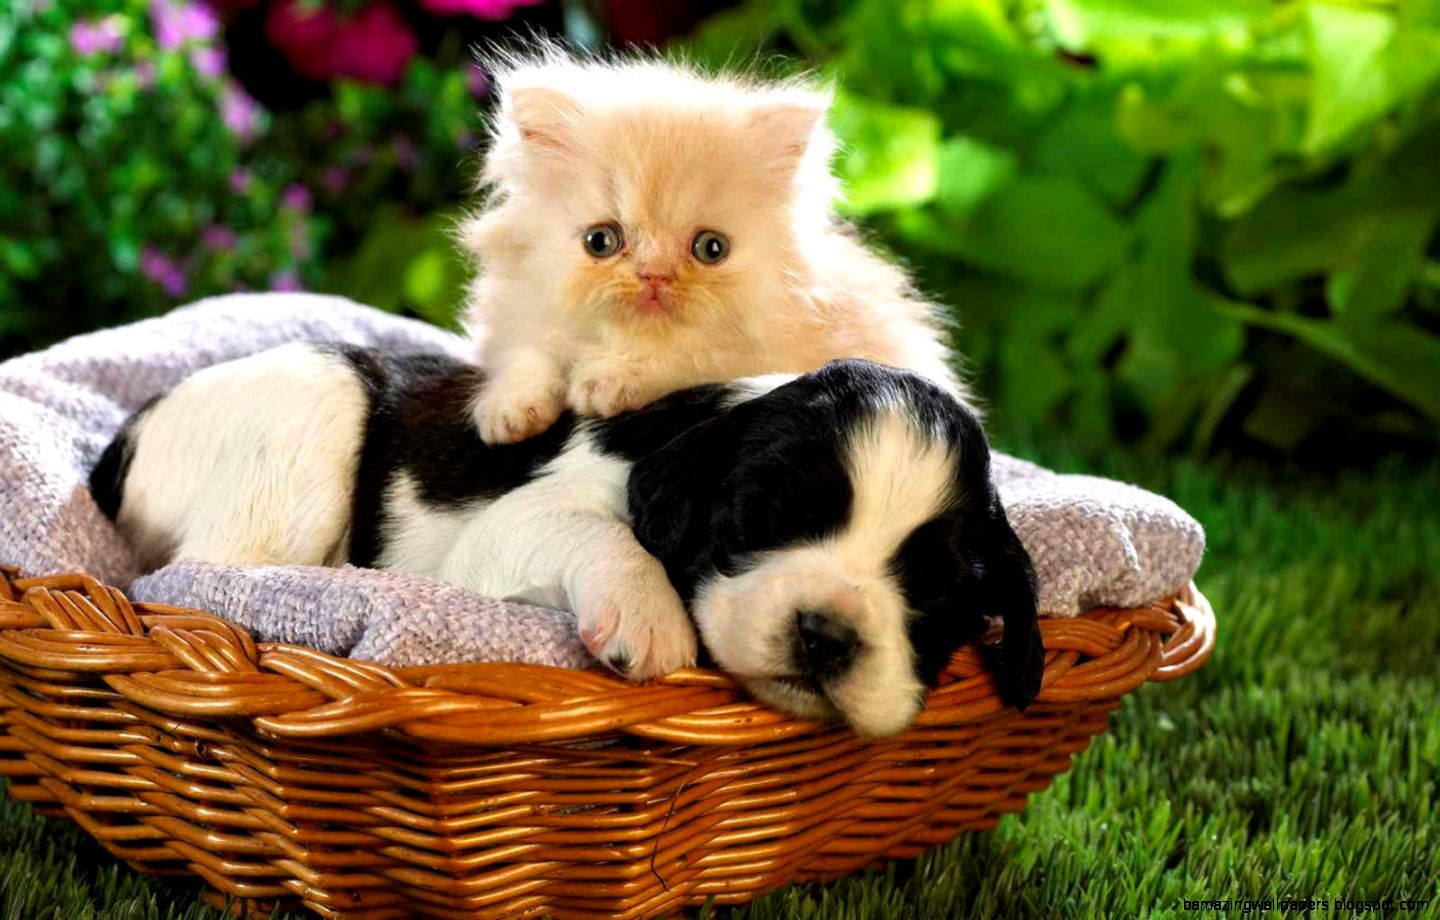 Pictures Of Cute Kittens And Puppies - Pictures Of Animals 2016